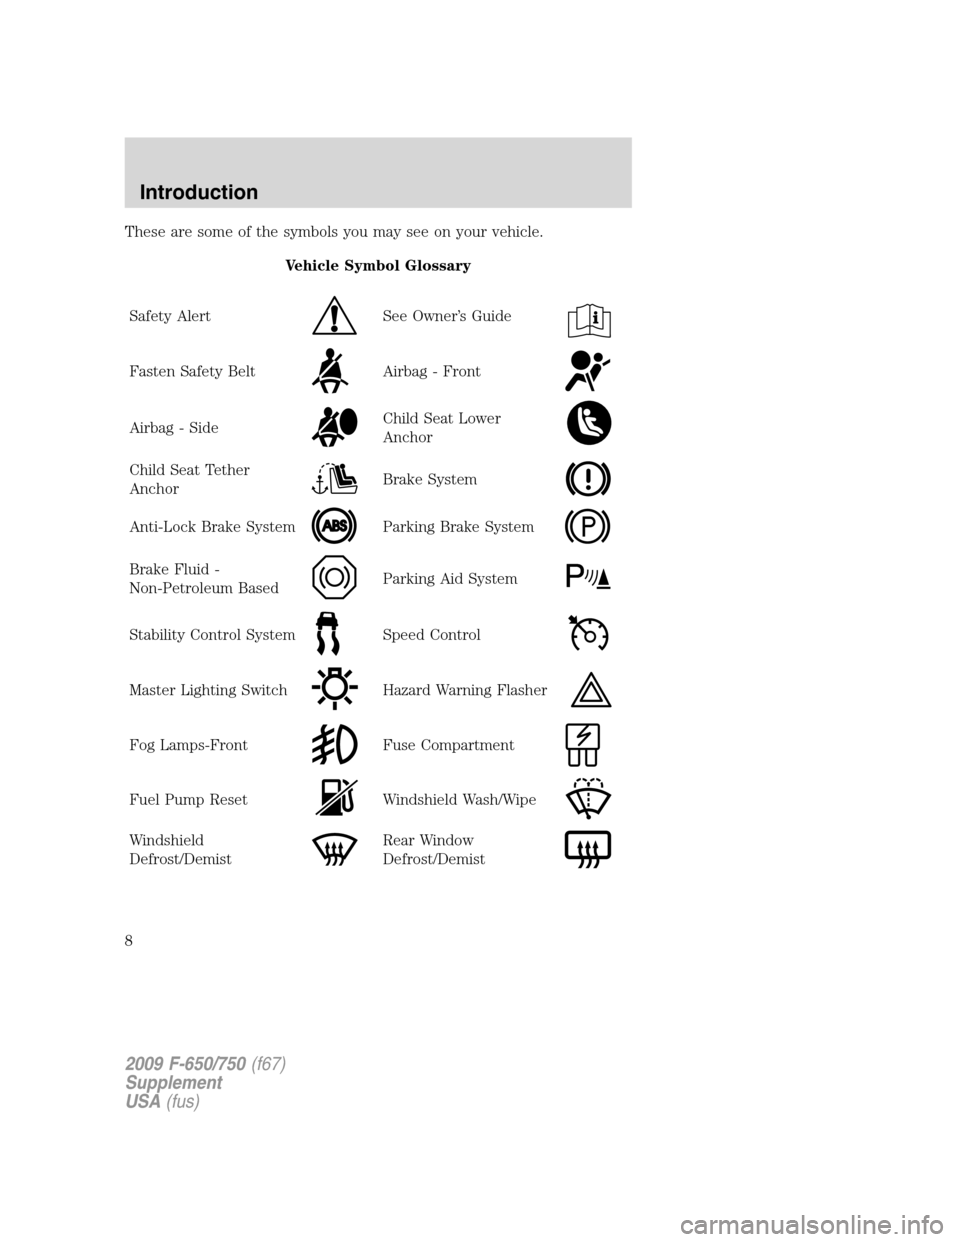 FORD F750 2009 12.G Owners Manual These are some of the symbols you may see on your vehicle.
Vehicle Symbol Glossary
Safety Alert
See Owner’s Guide
Fasten Safety BeltAirbag - Front
Airbag - SideChild Seat Lower
Anchor
Child Seat Tet